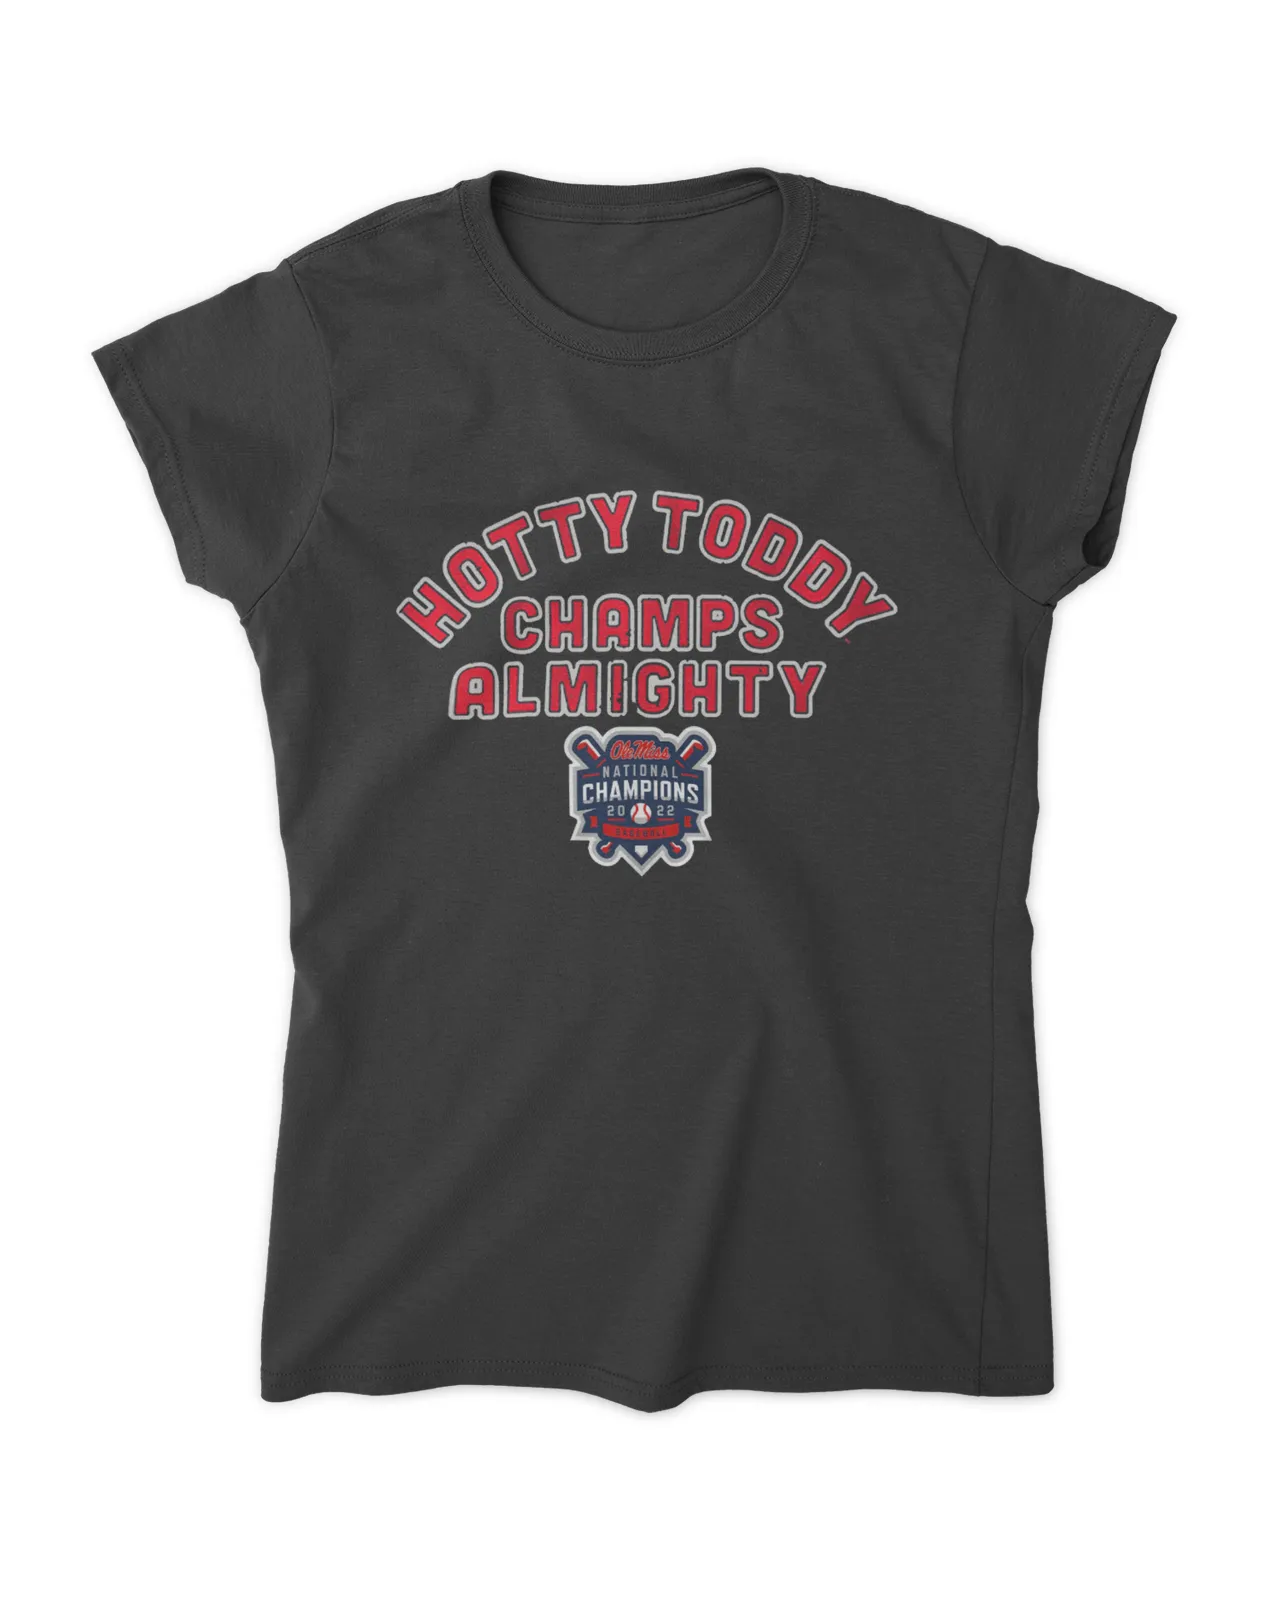 Ole Miss Baseball Hotty Toddy Champs Almighty Shirt